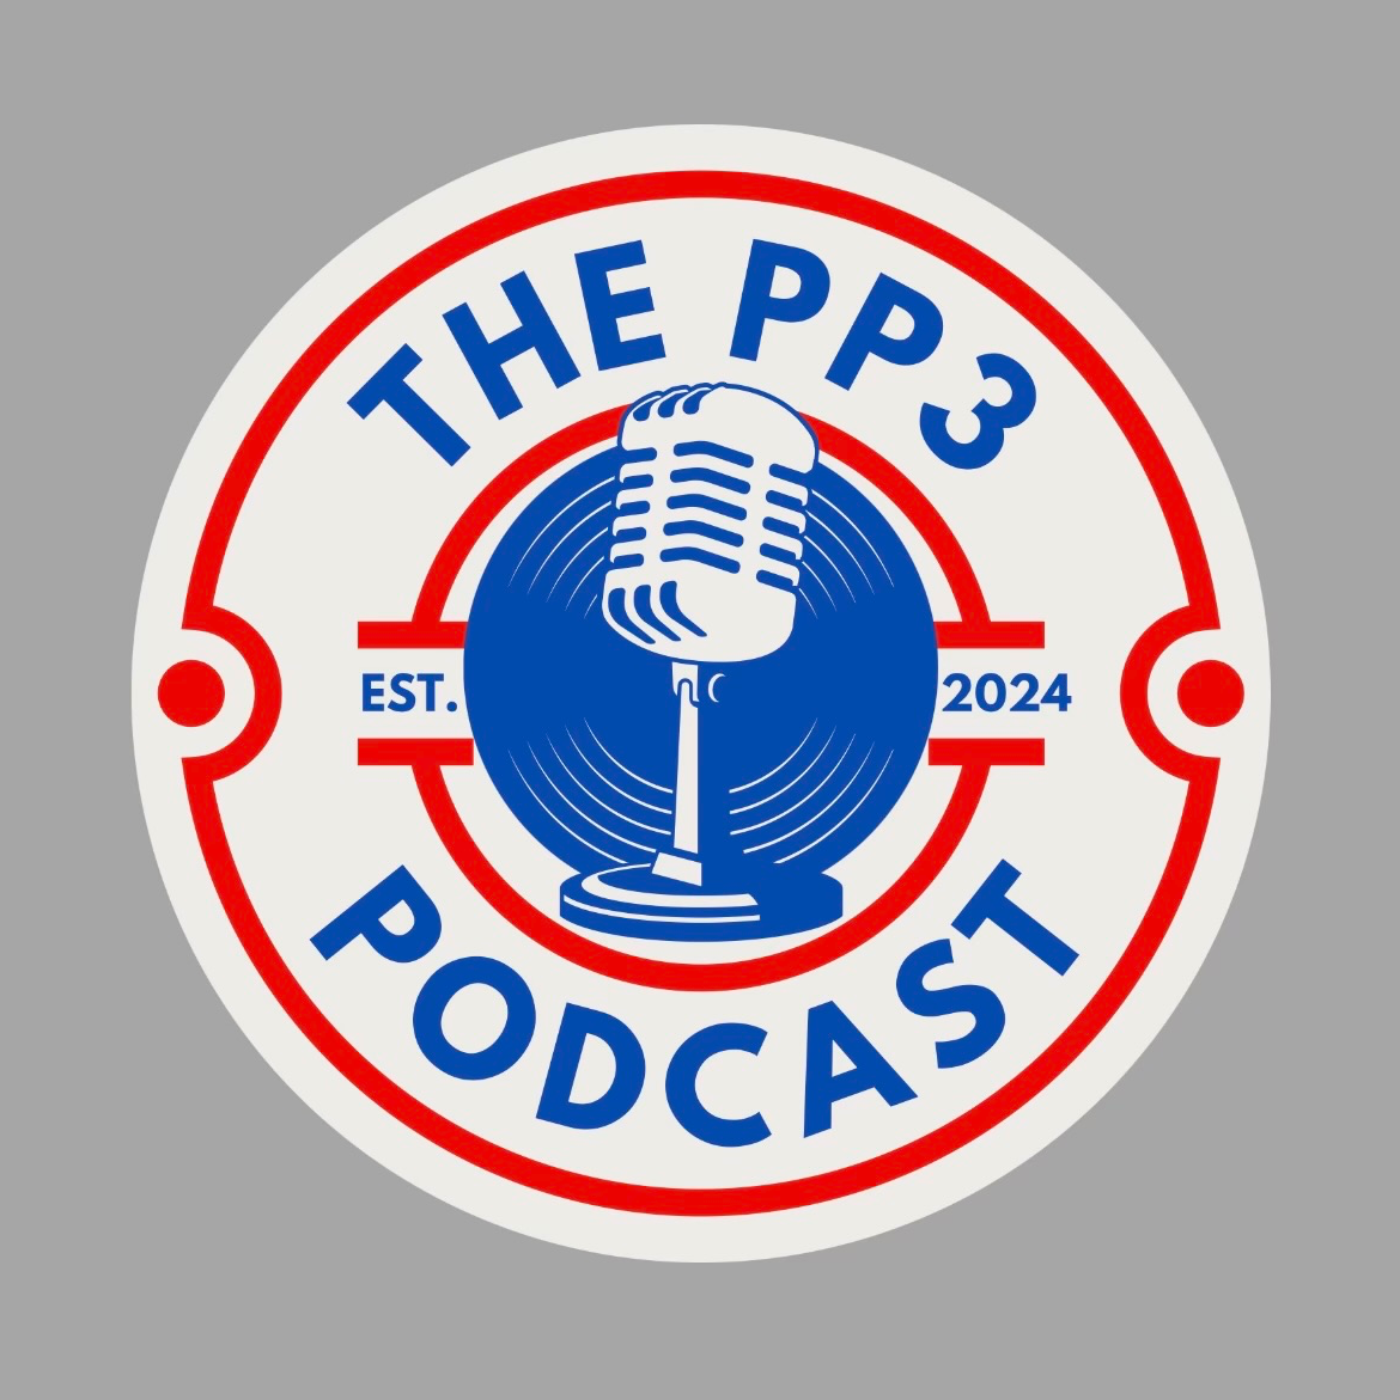 PP3 Episode 13: NHL playoff overview and VIJHL news